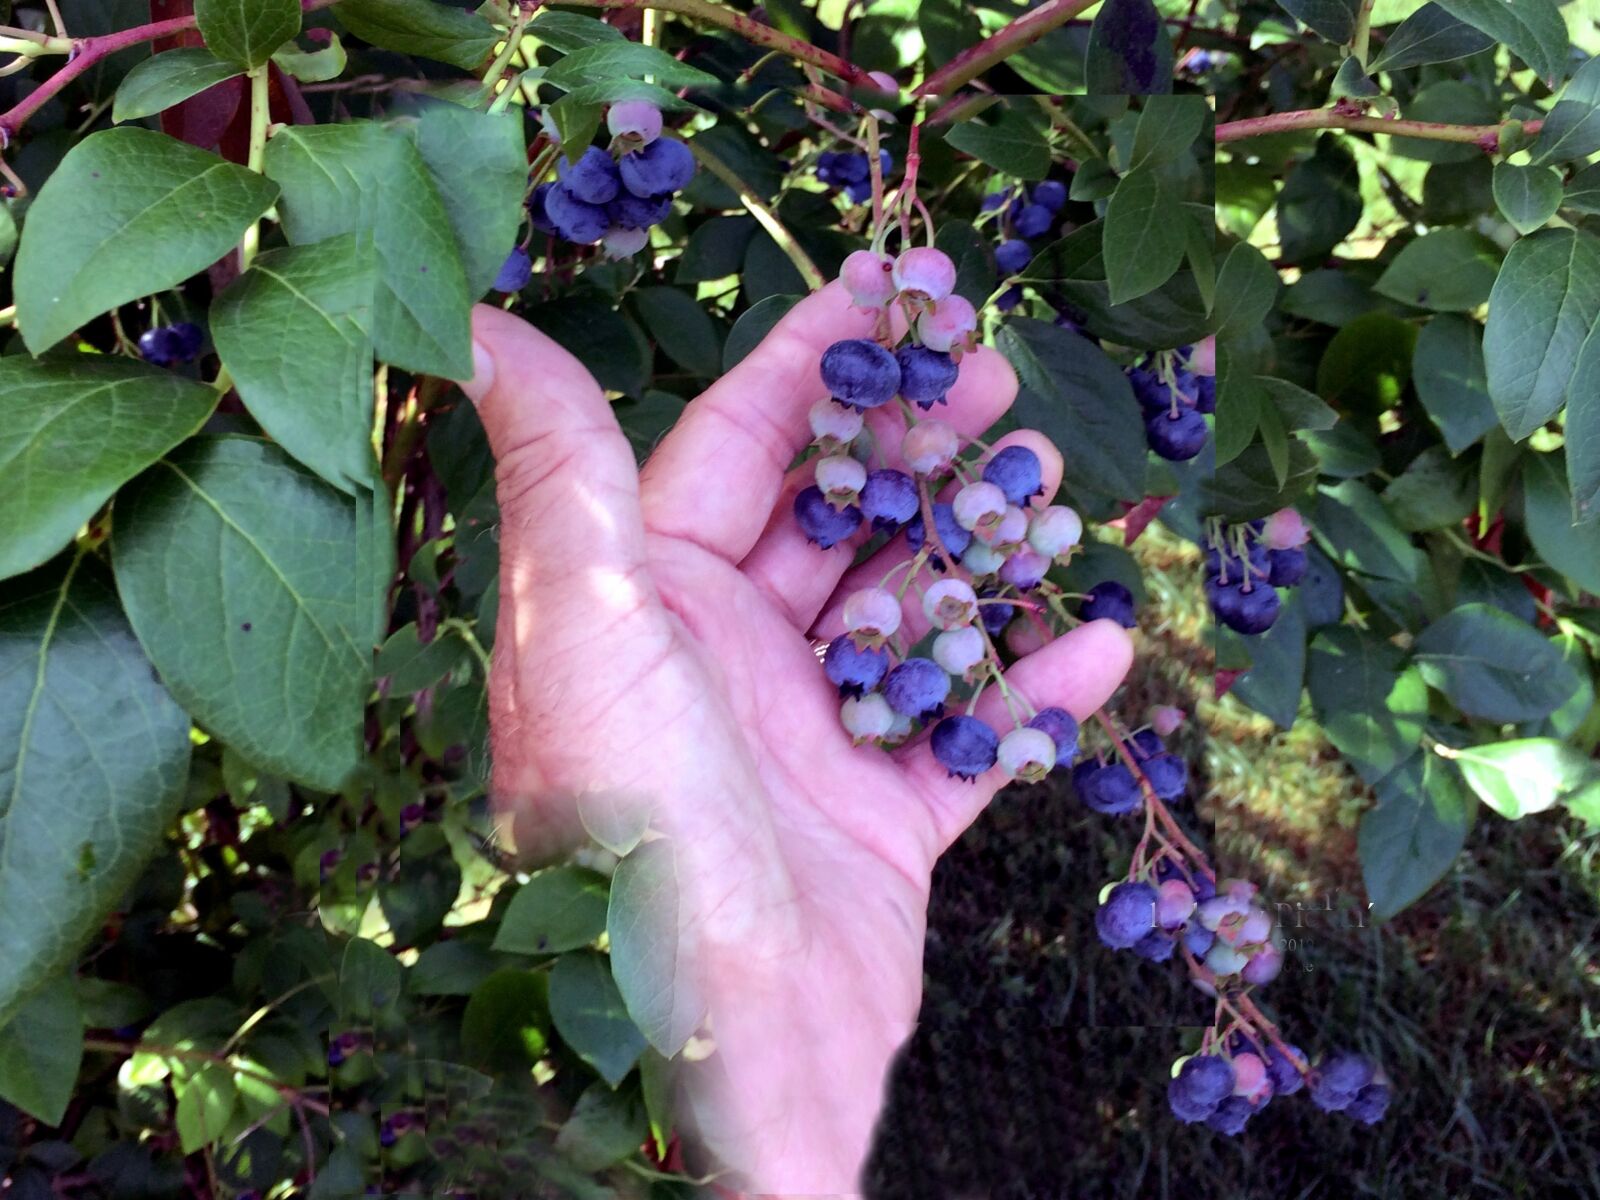 Apple iPhone 5s sample photo. Blueberries, blueberry picking, sweet photography